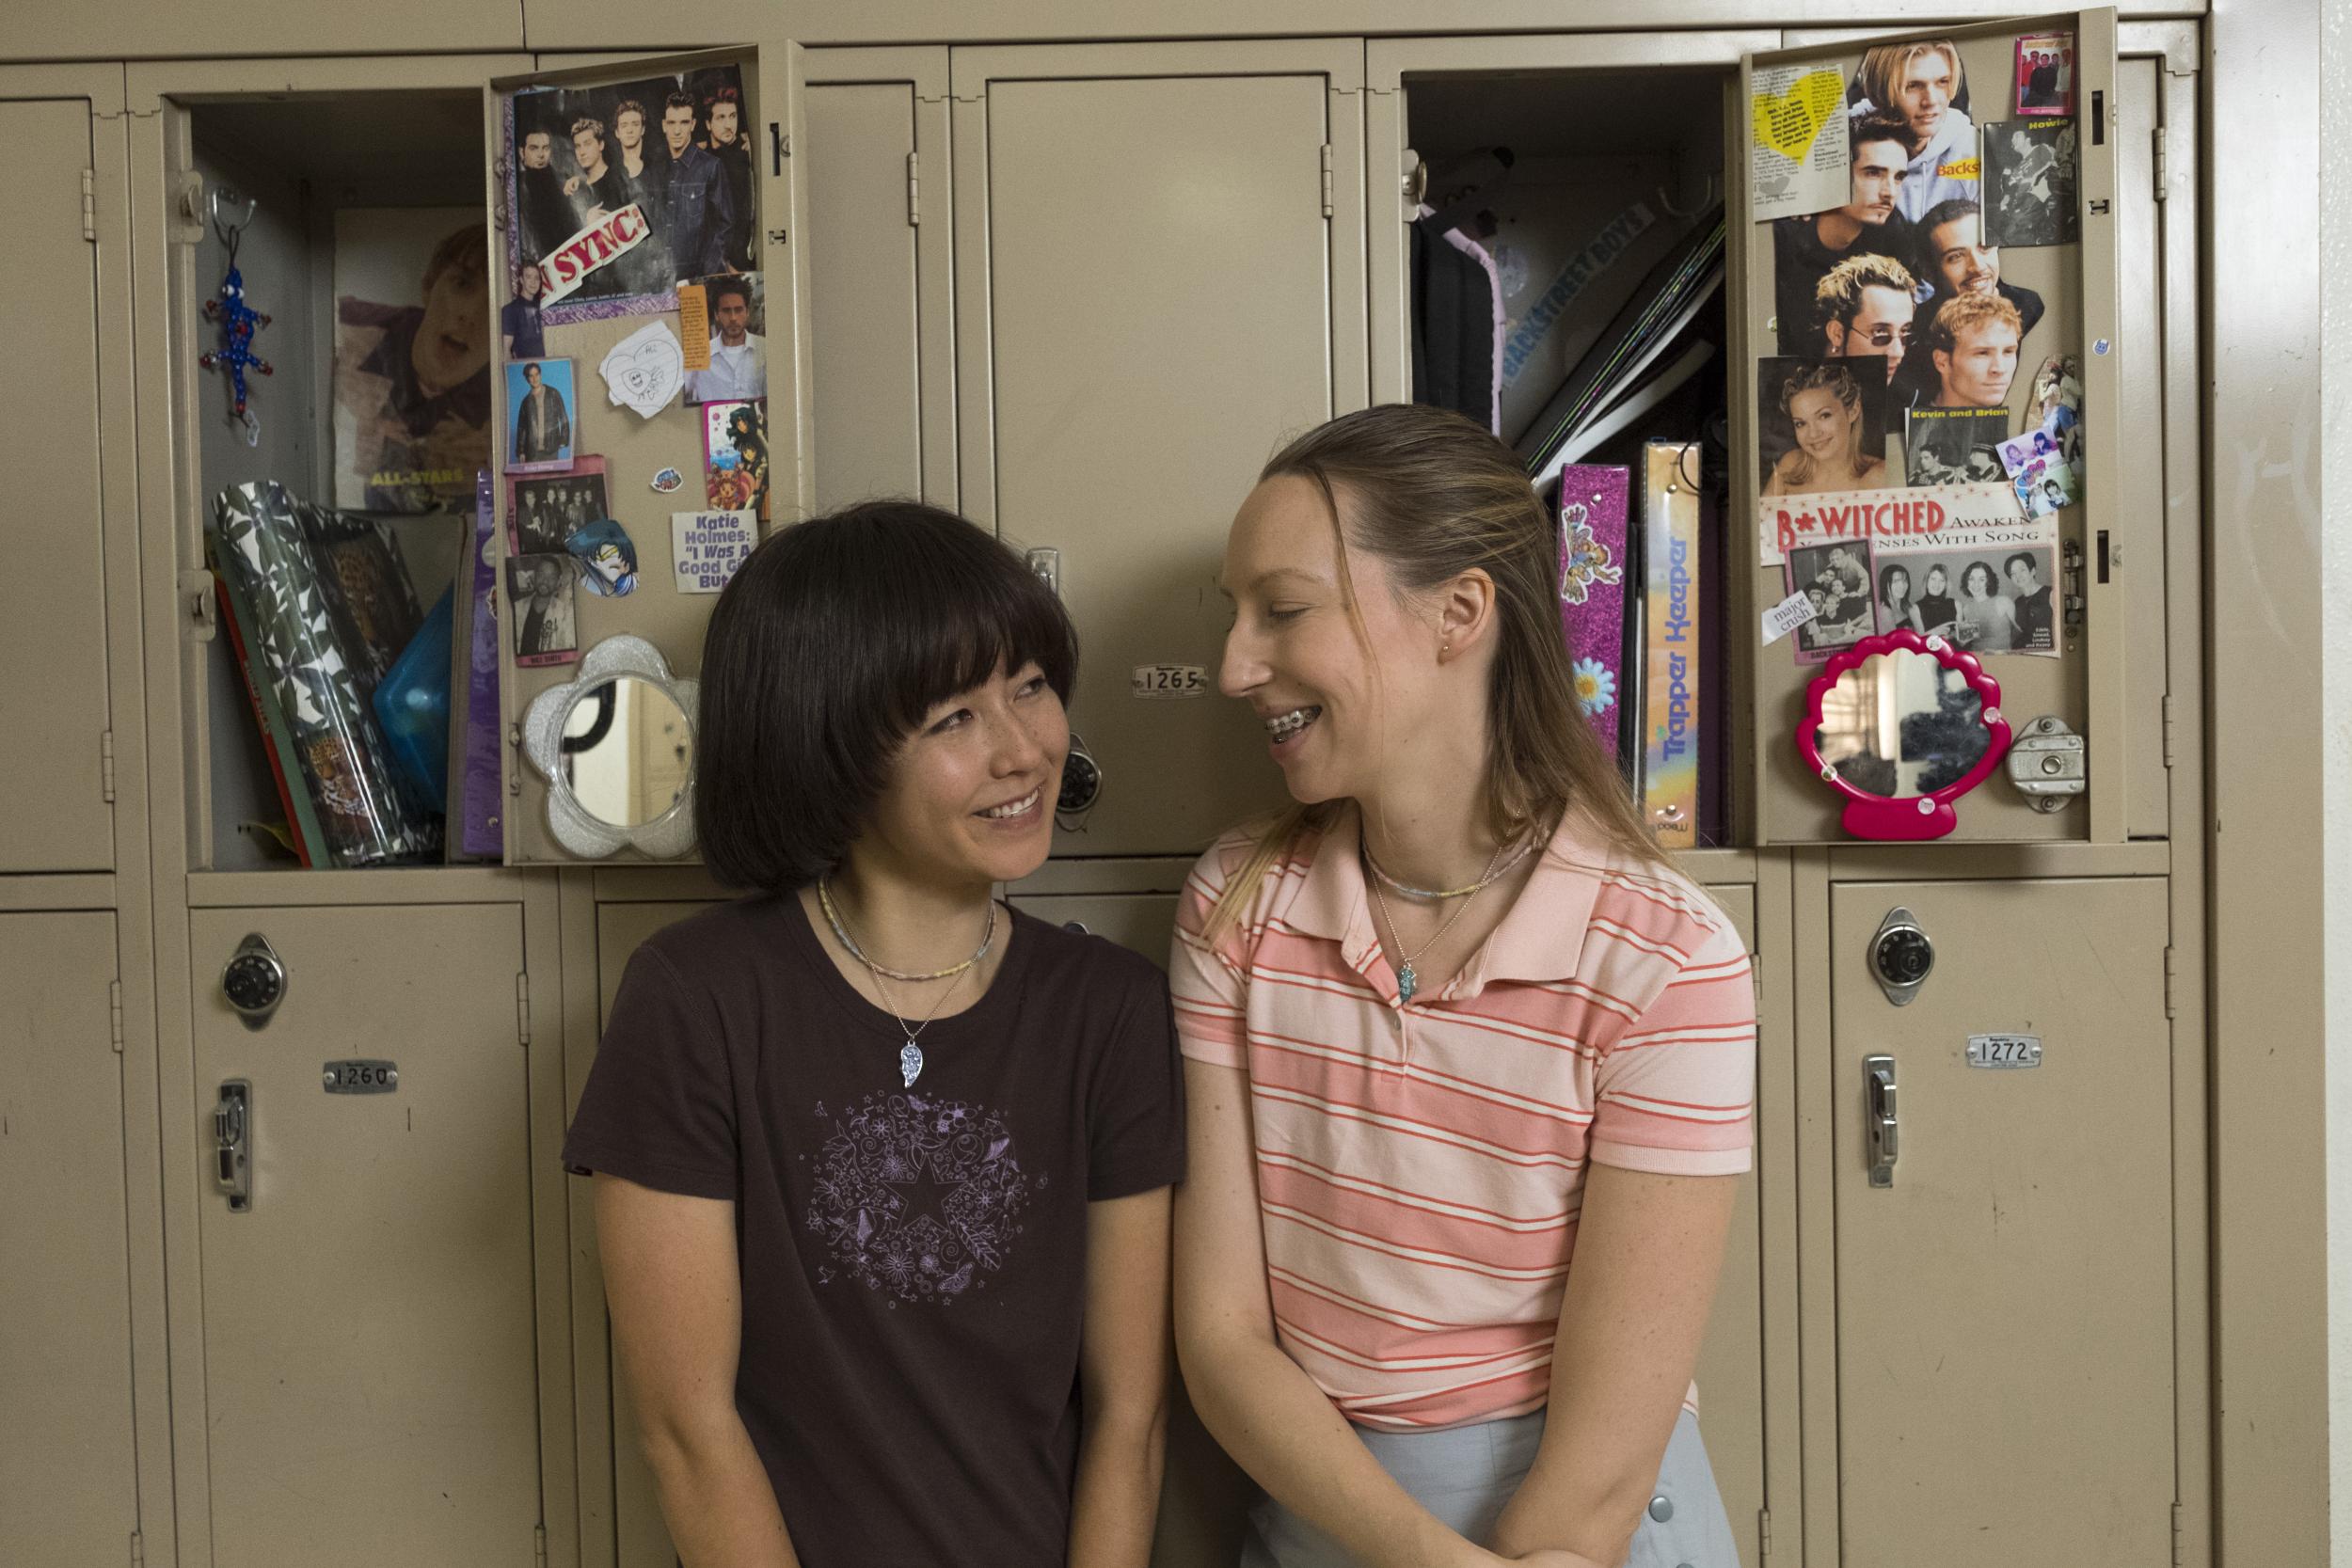 ‘Pen15’ is one of the funniest shows on TV at the moment